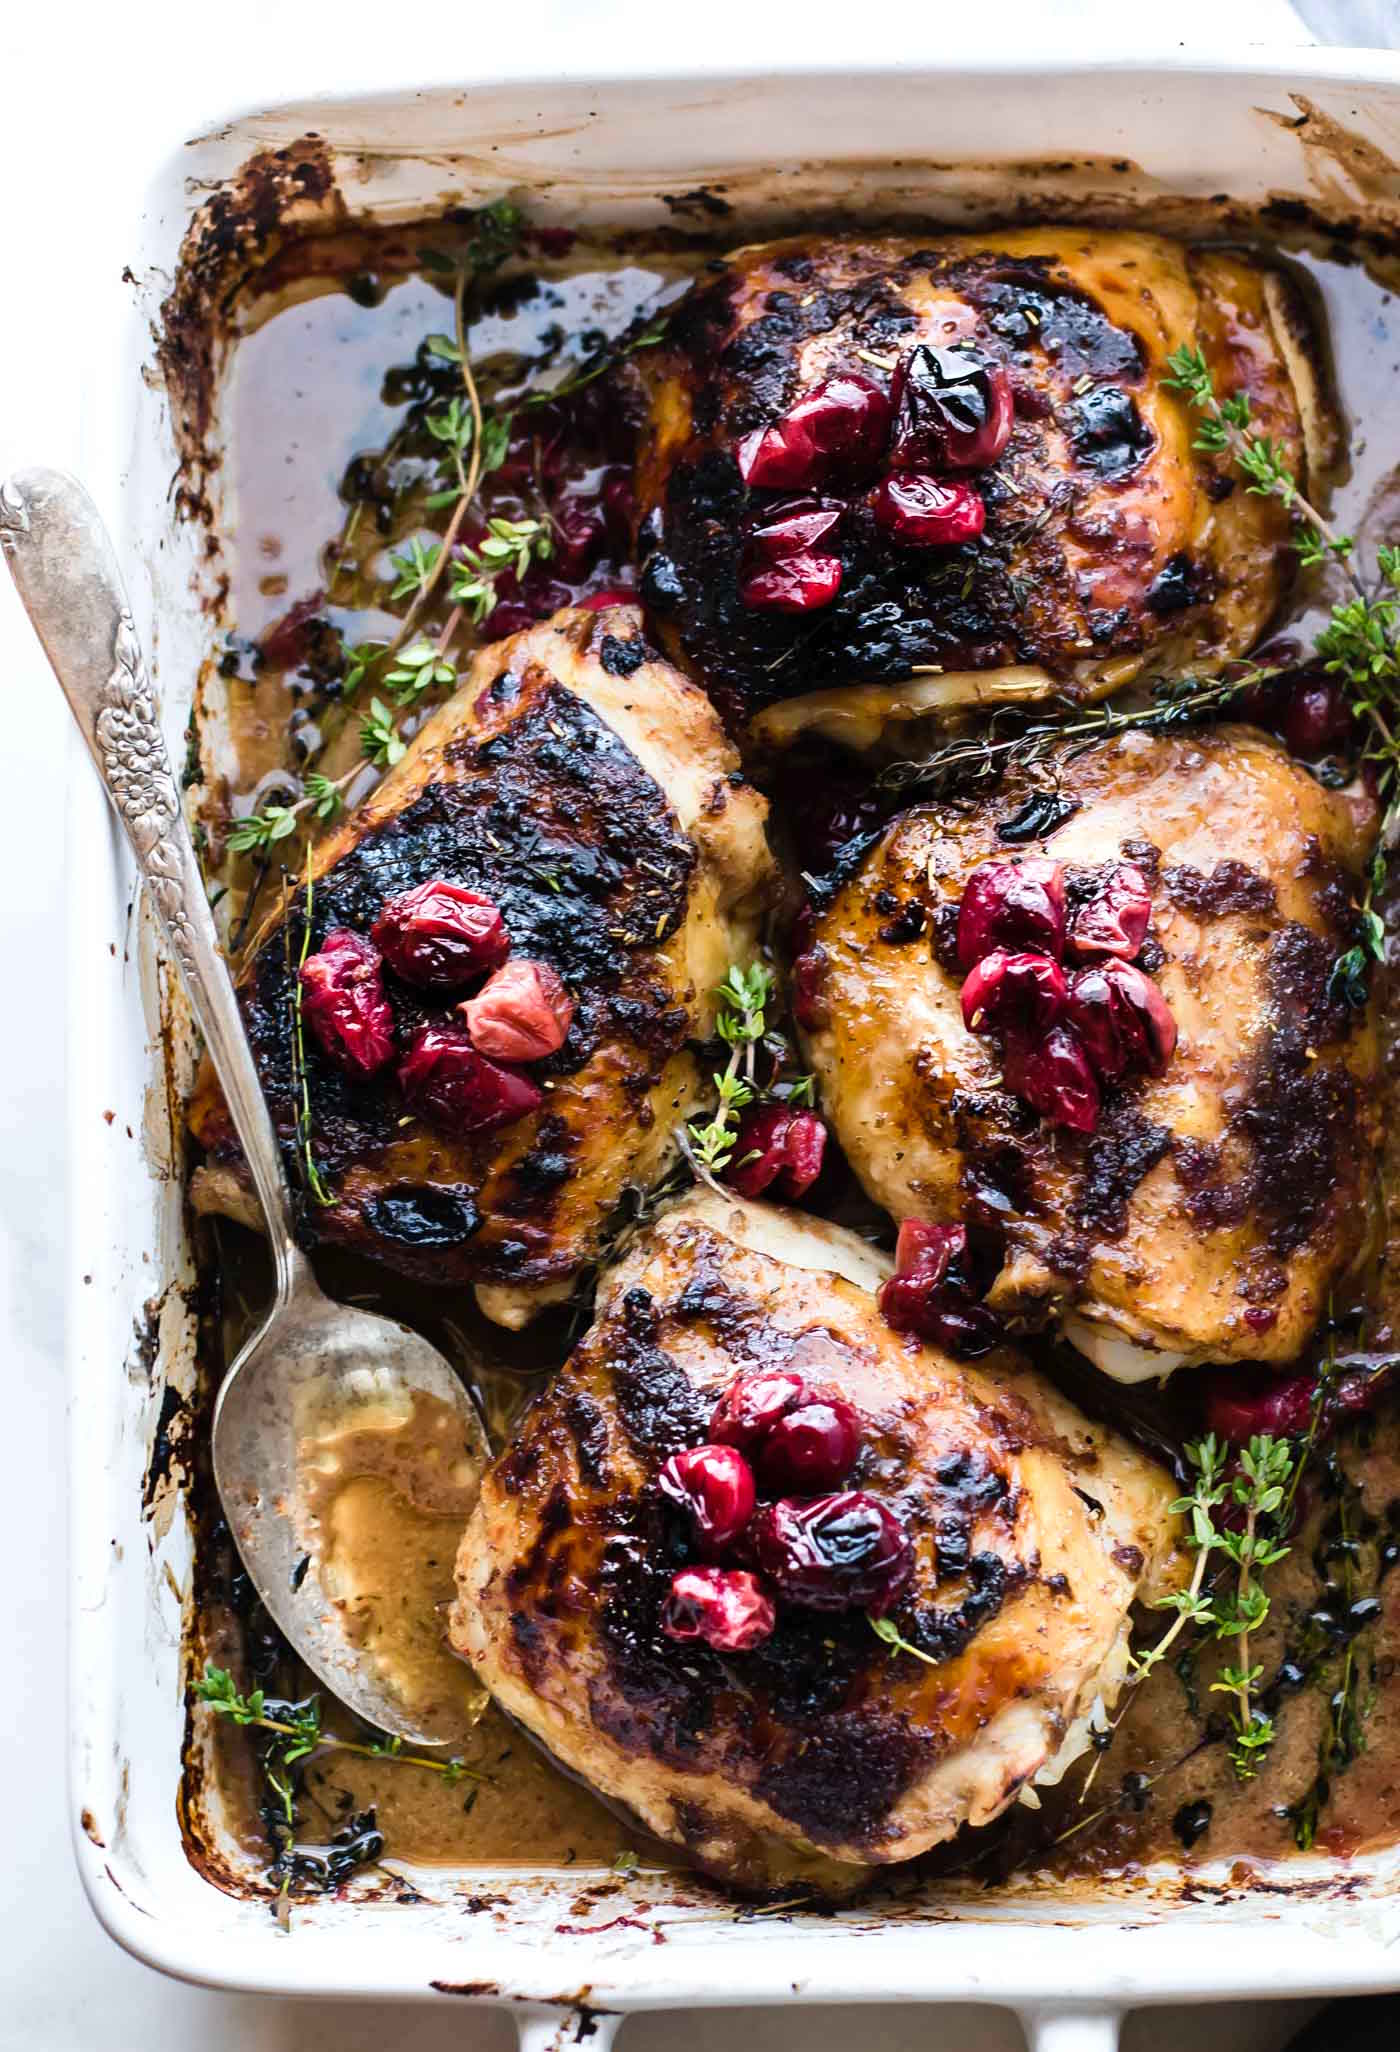 Slow Roasted Chicken made with a balsamic chicken marinade recipe and fresh cranberries